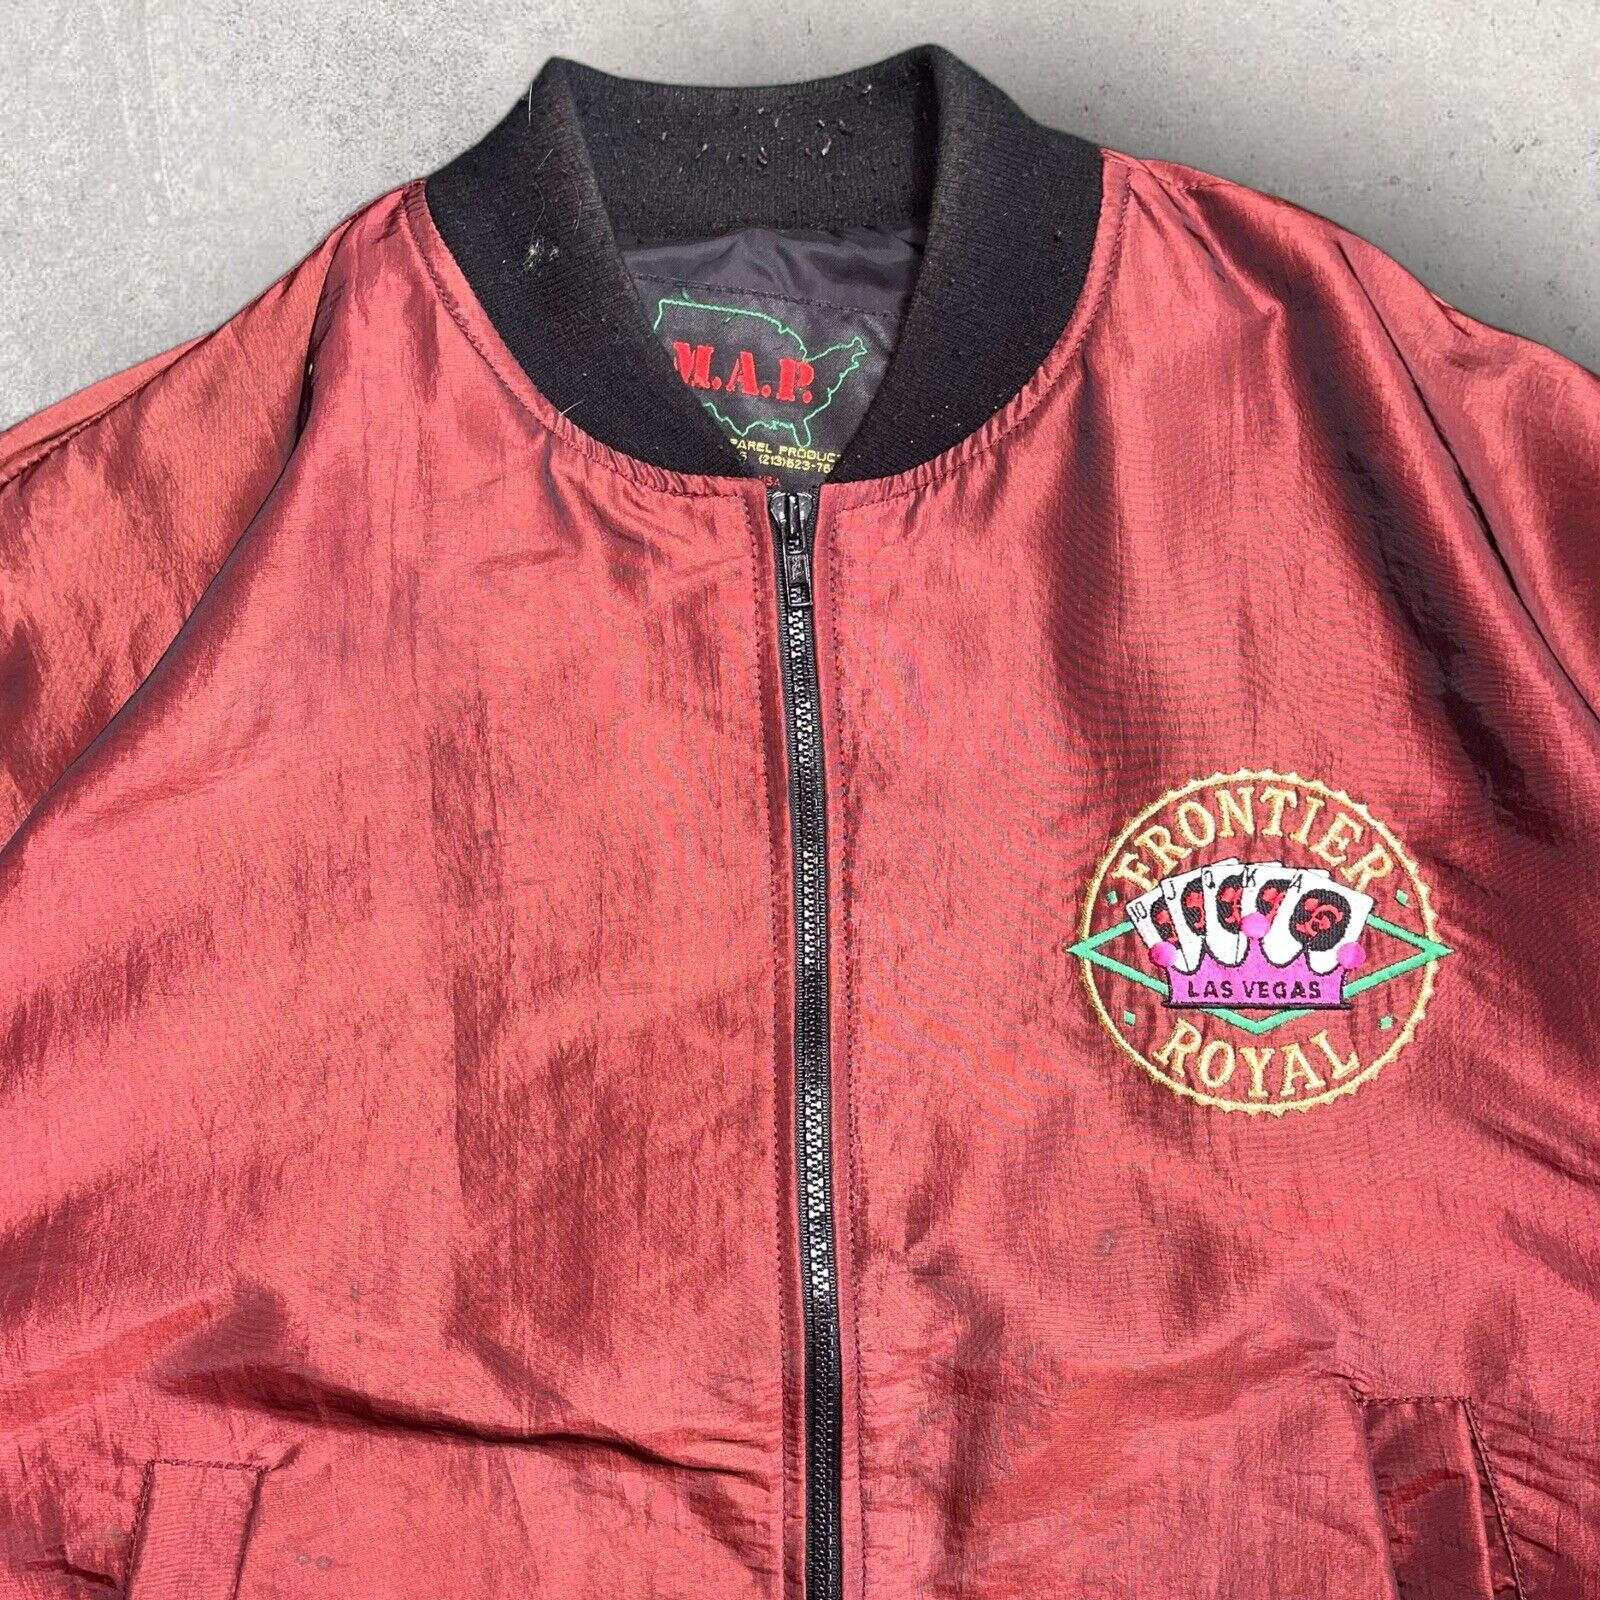 VTG M.A.P. Master Apparel Products Frontier Royal Casino Vegas Bomber Reflective